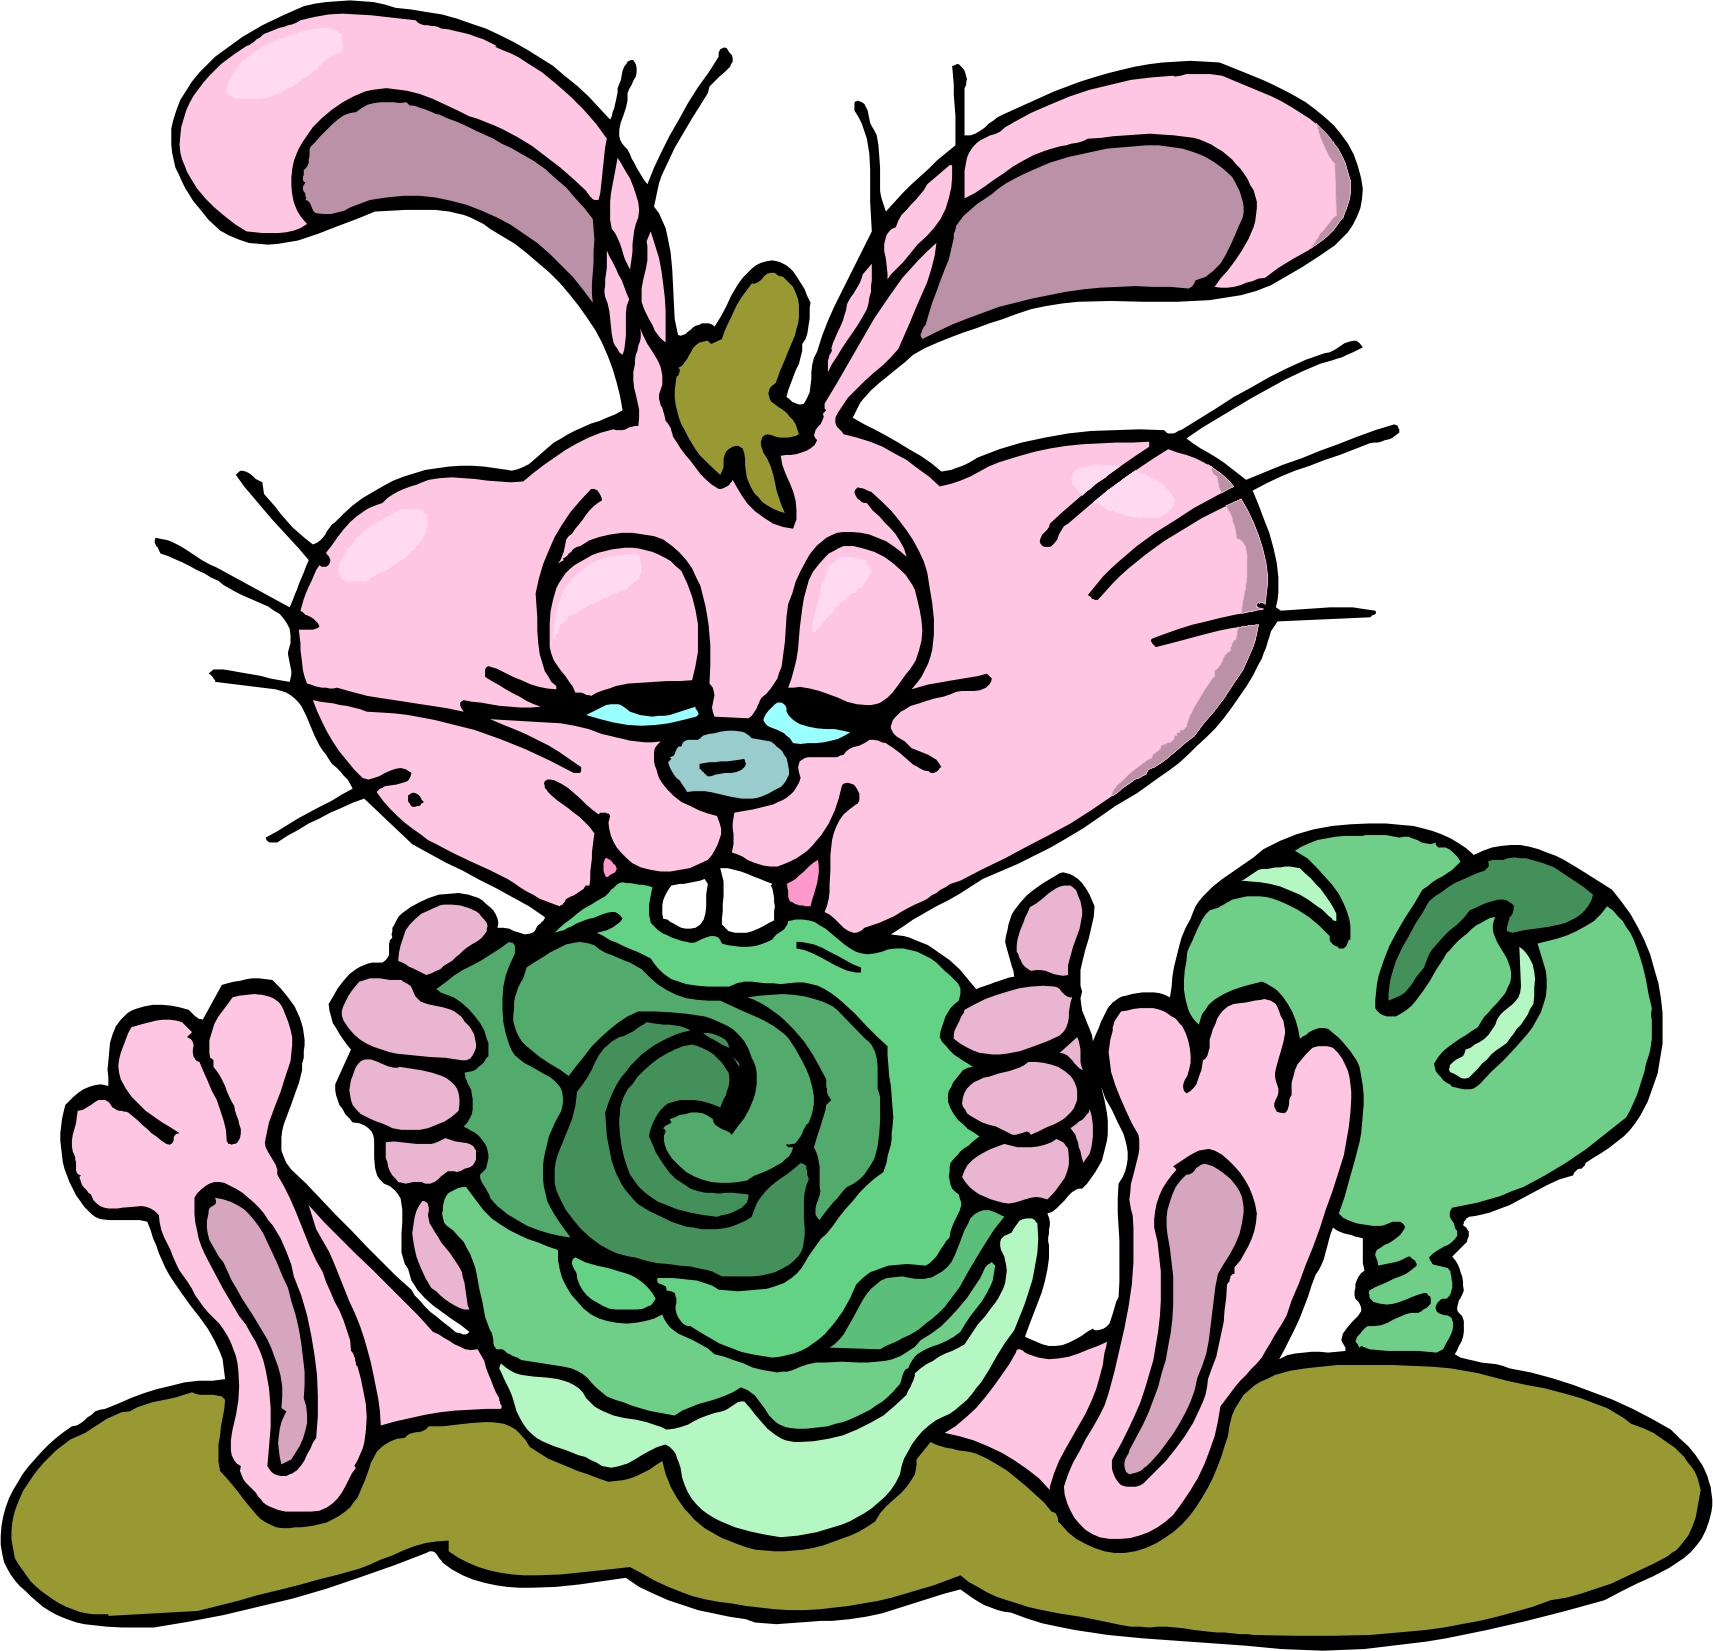 Cartoon Picture Of A Rabbit - Clipart library